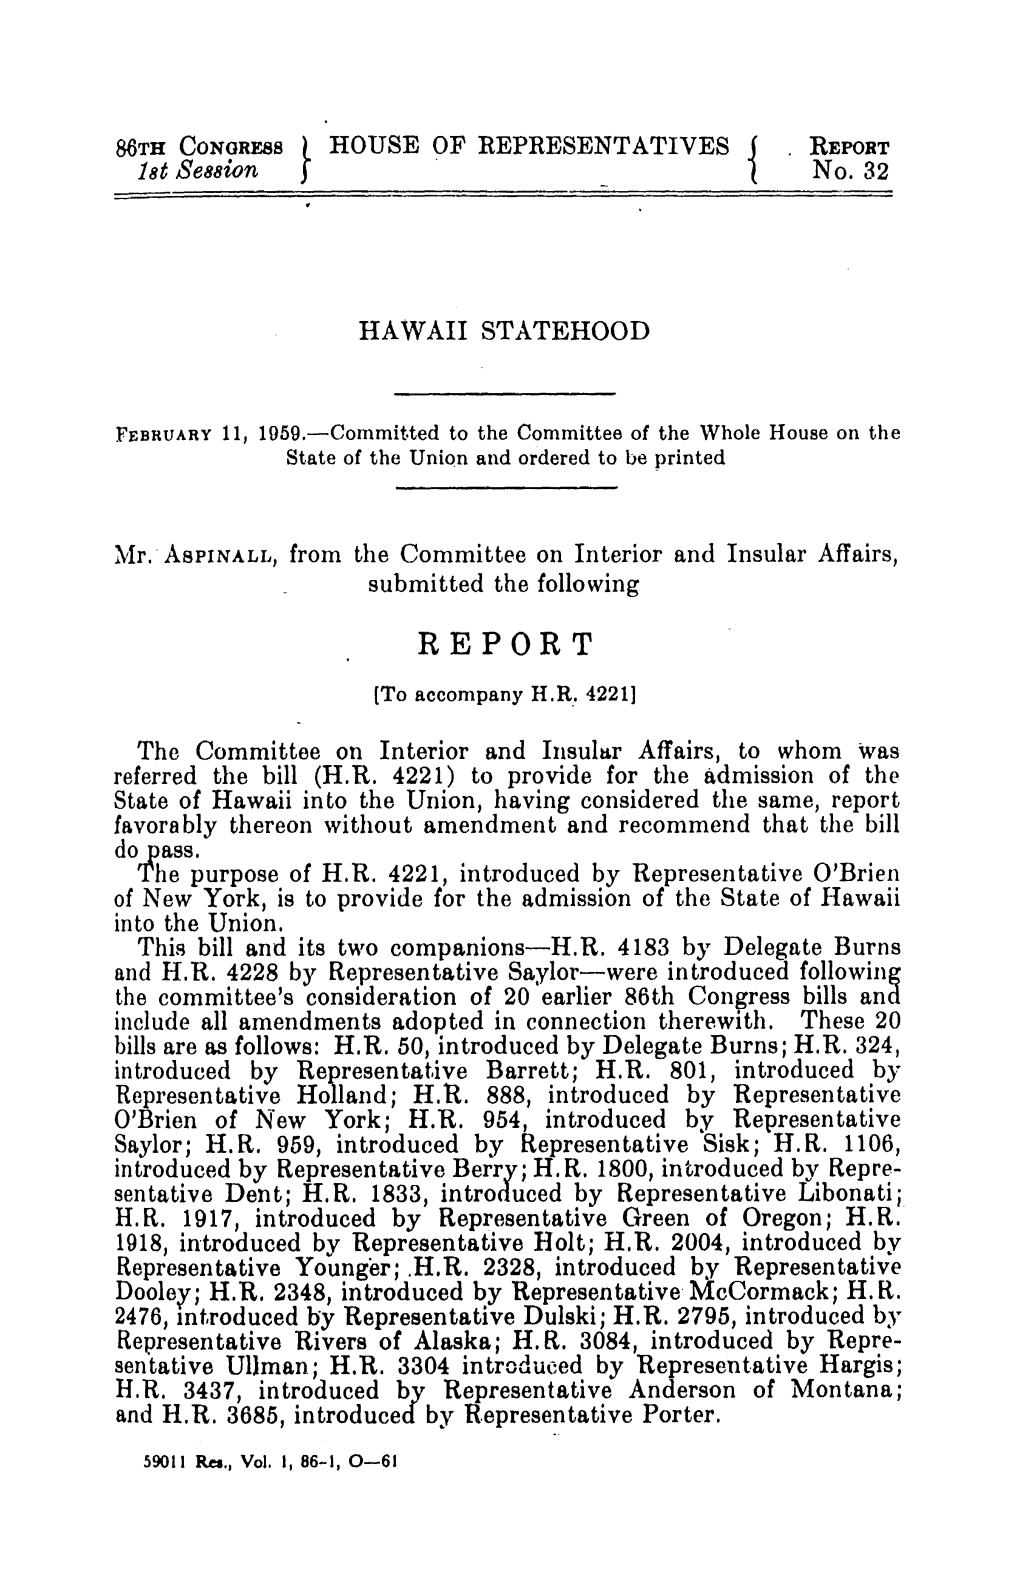 U.S. House Report 32 for H.R. 4221 (Feb 1959)